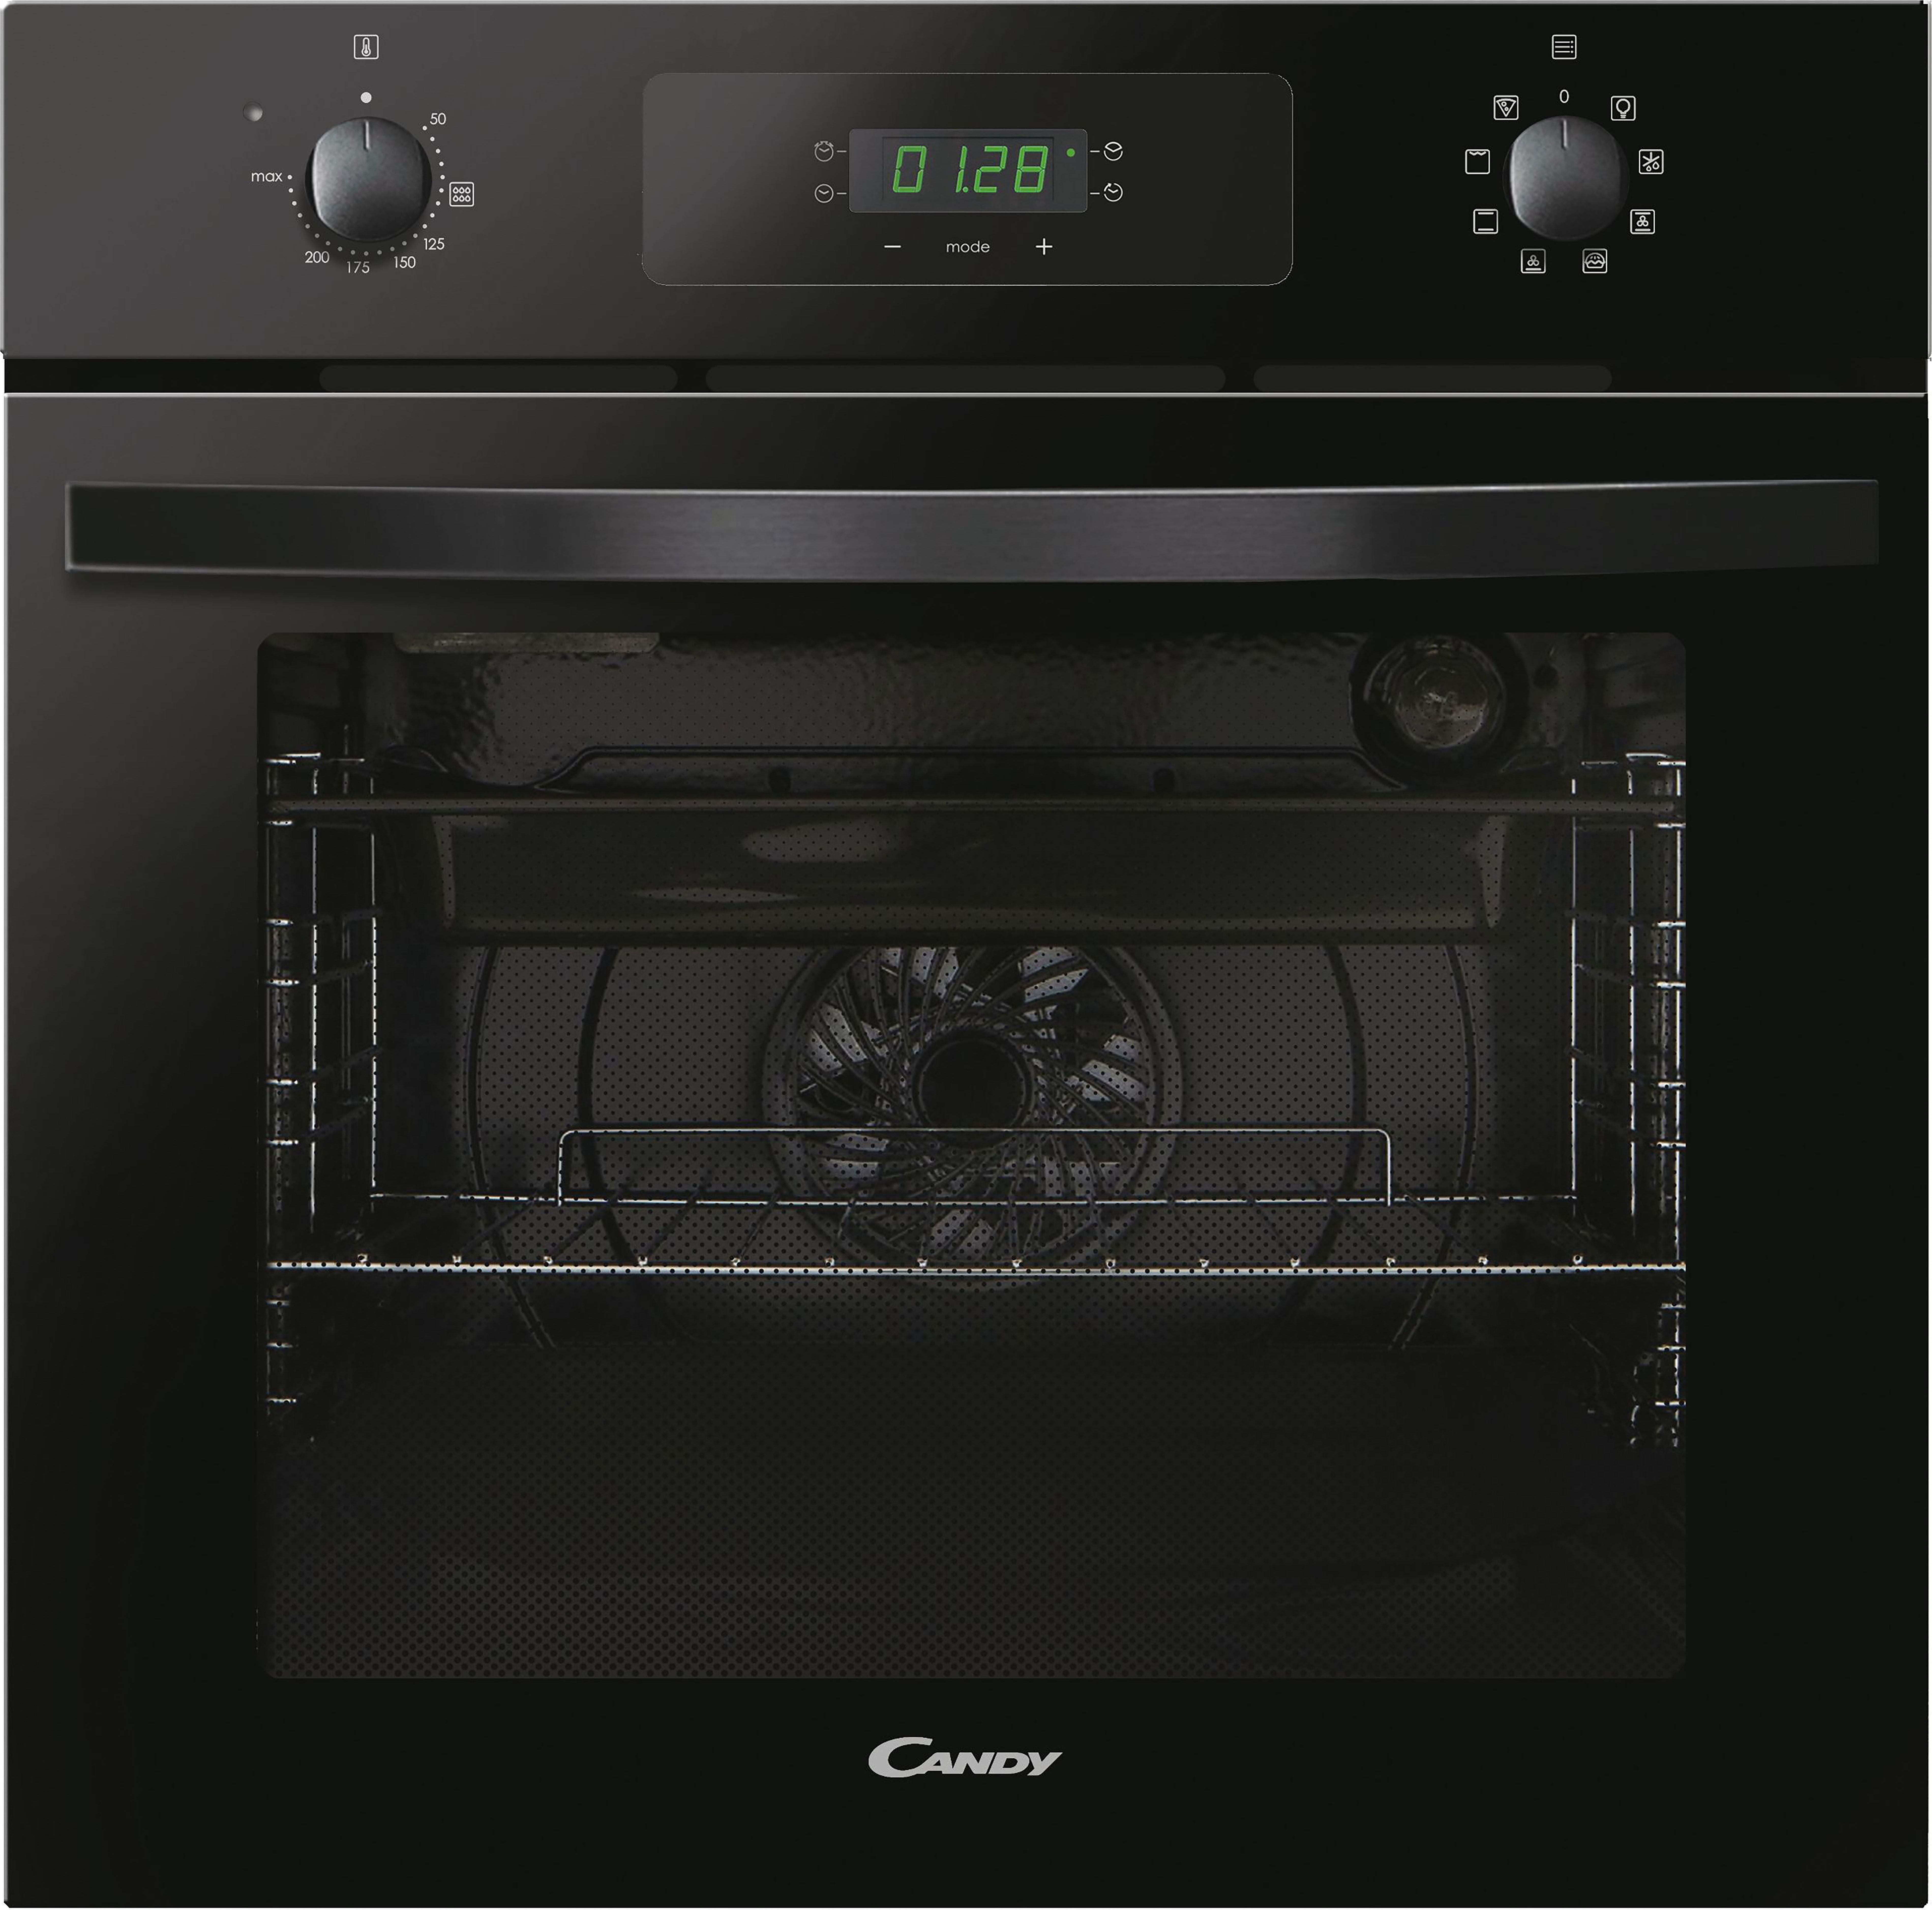 Candy Idea FIDCN615/1 Built In Electric Single Oven - Black - A+ Rated, Black